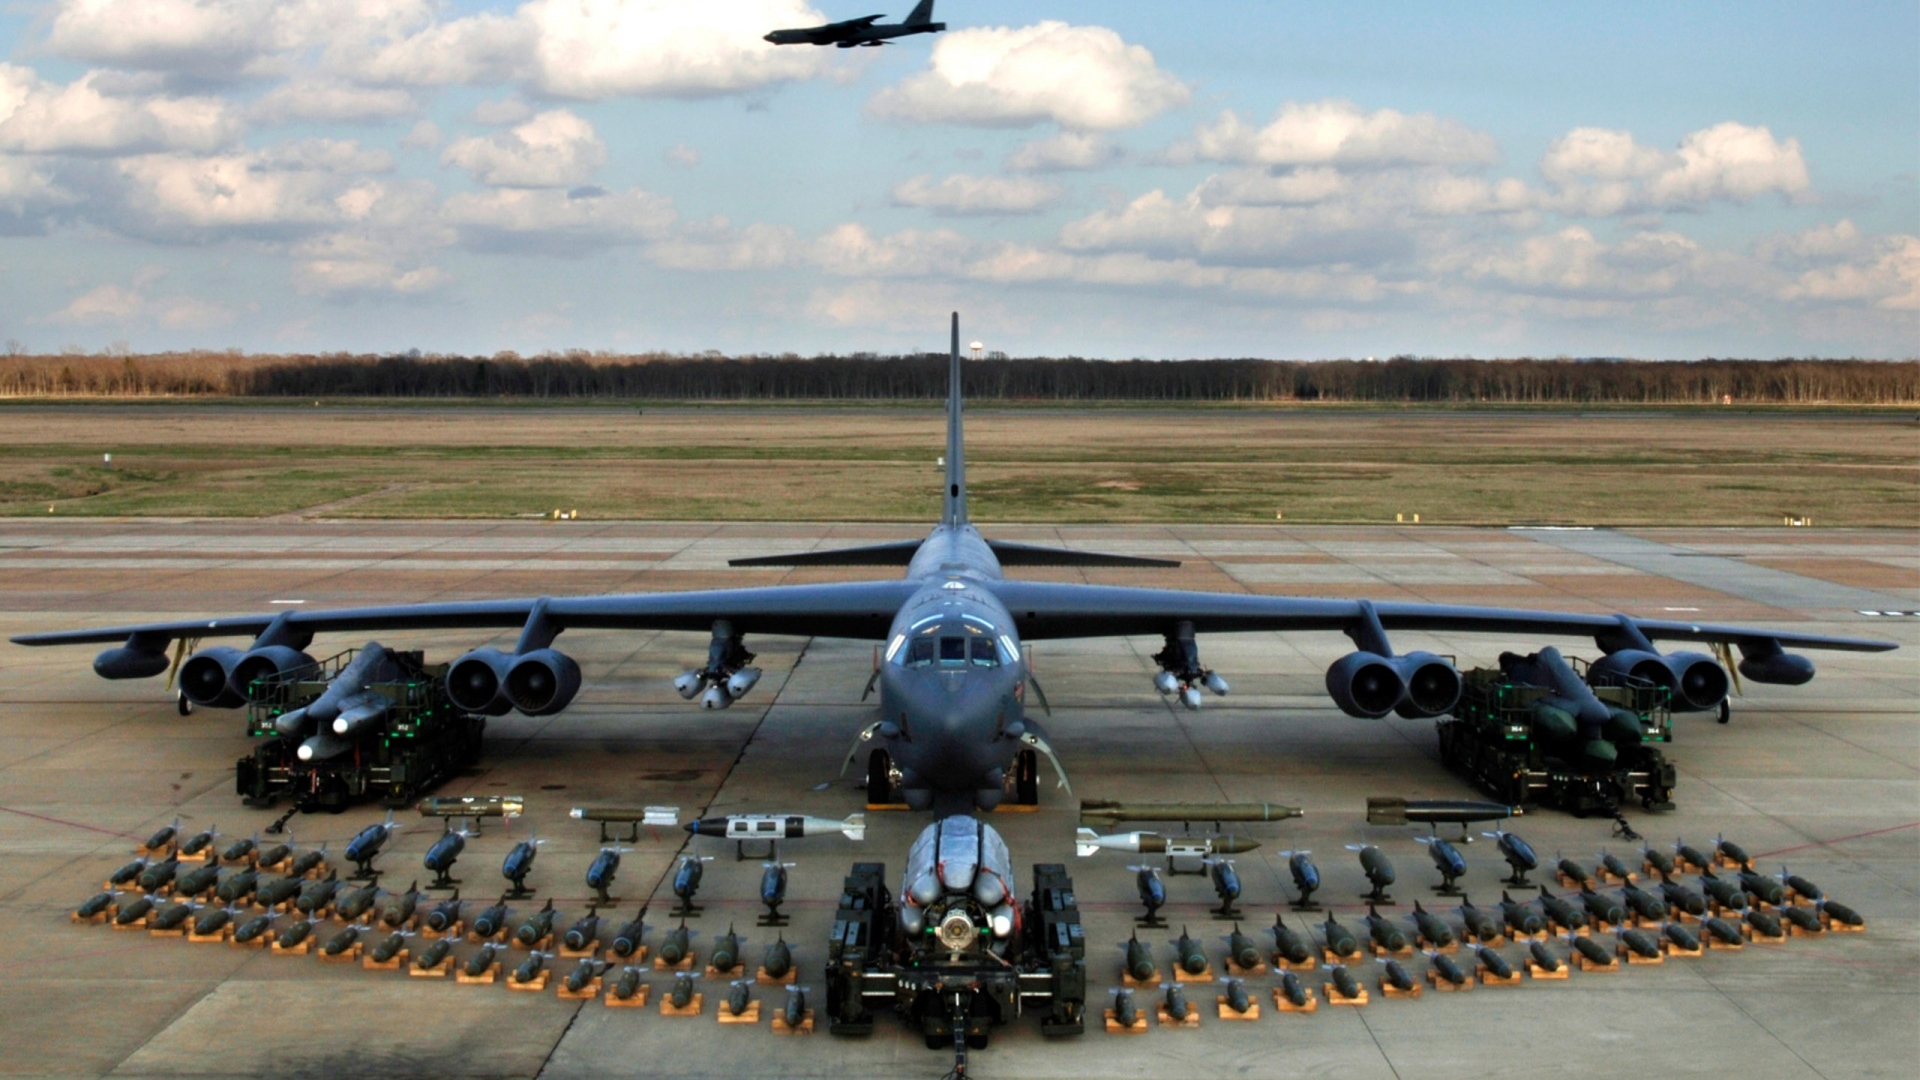 Best Boeing B 52 Stratofortress Background for mobile